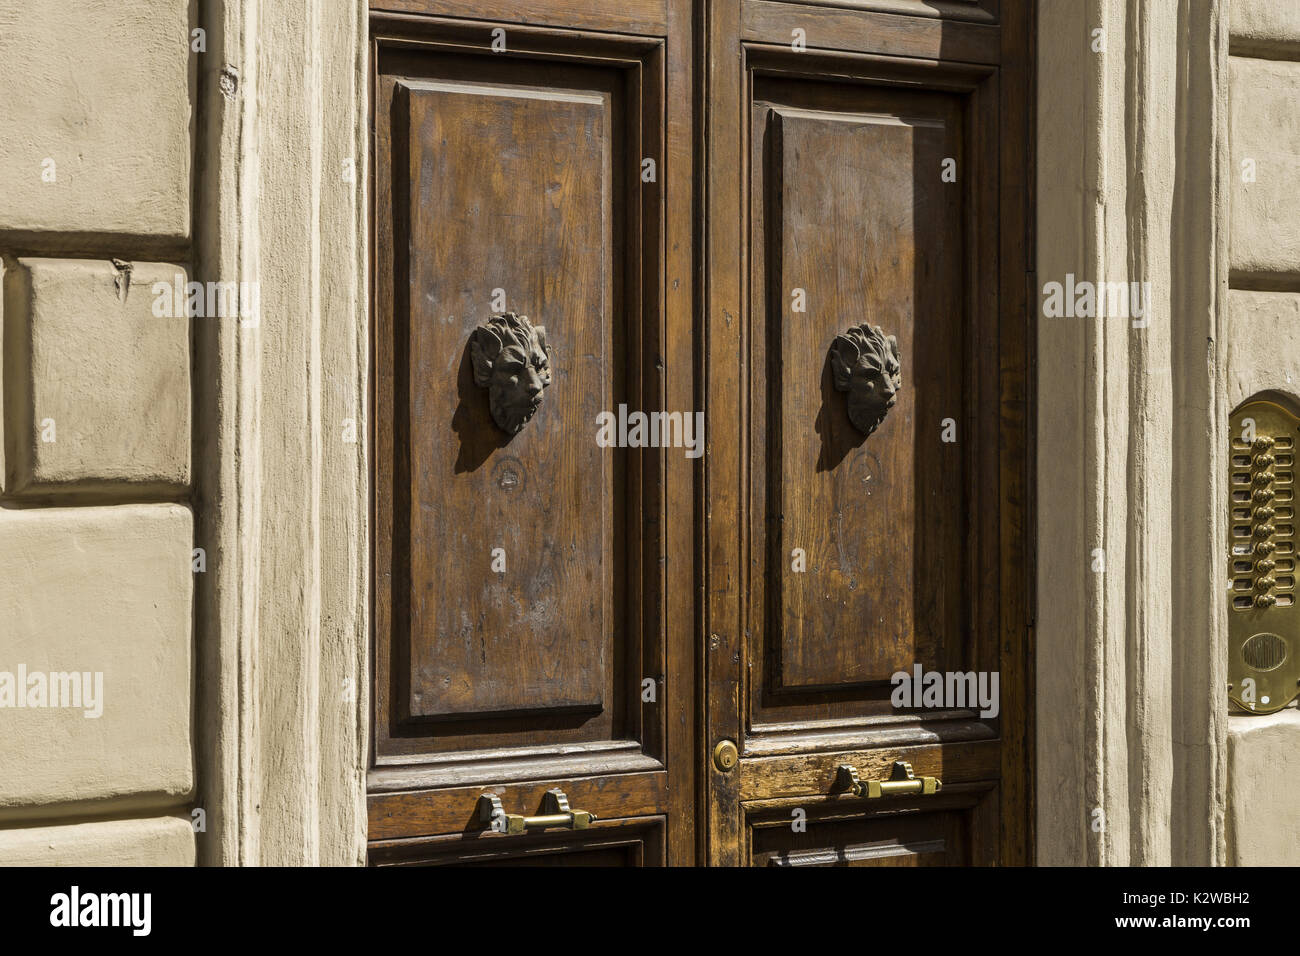 Old wooden front door decorated with two lion heads of metal. Part of the facade of the old building. Rome, Italy Stock Photo